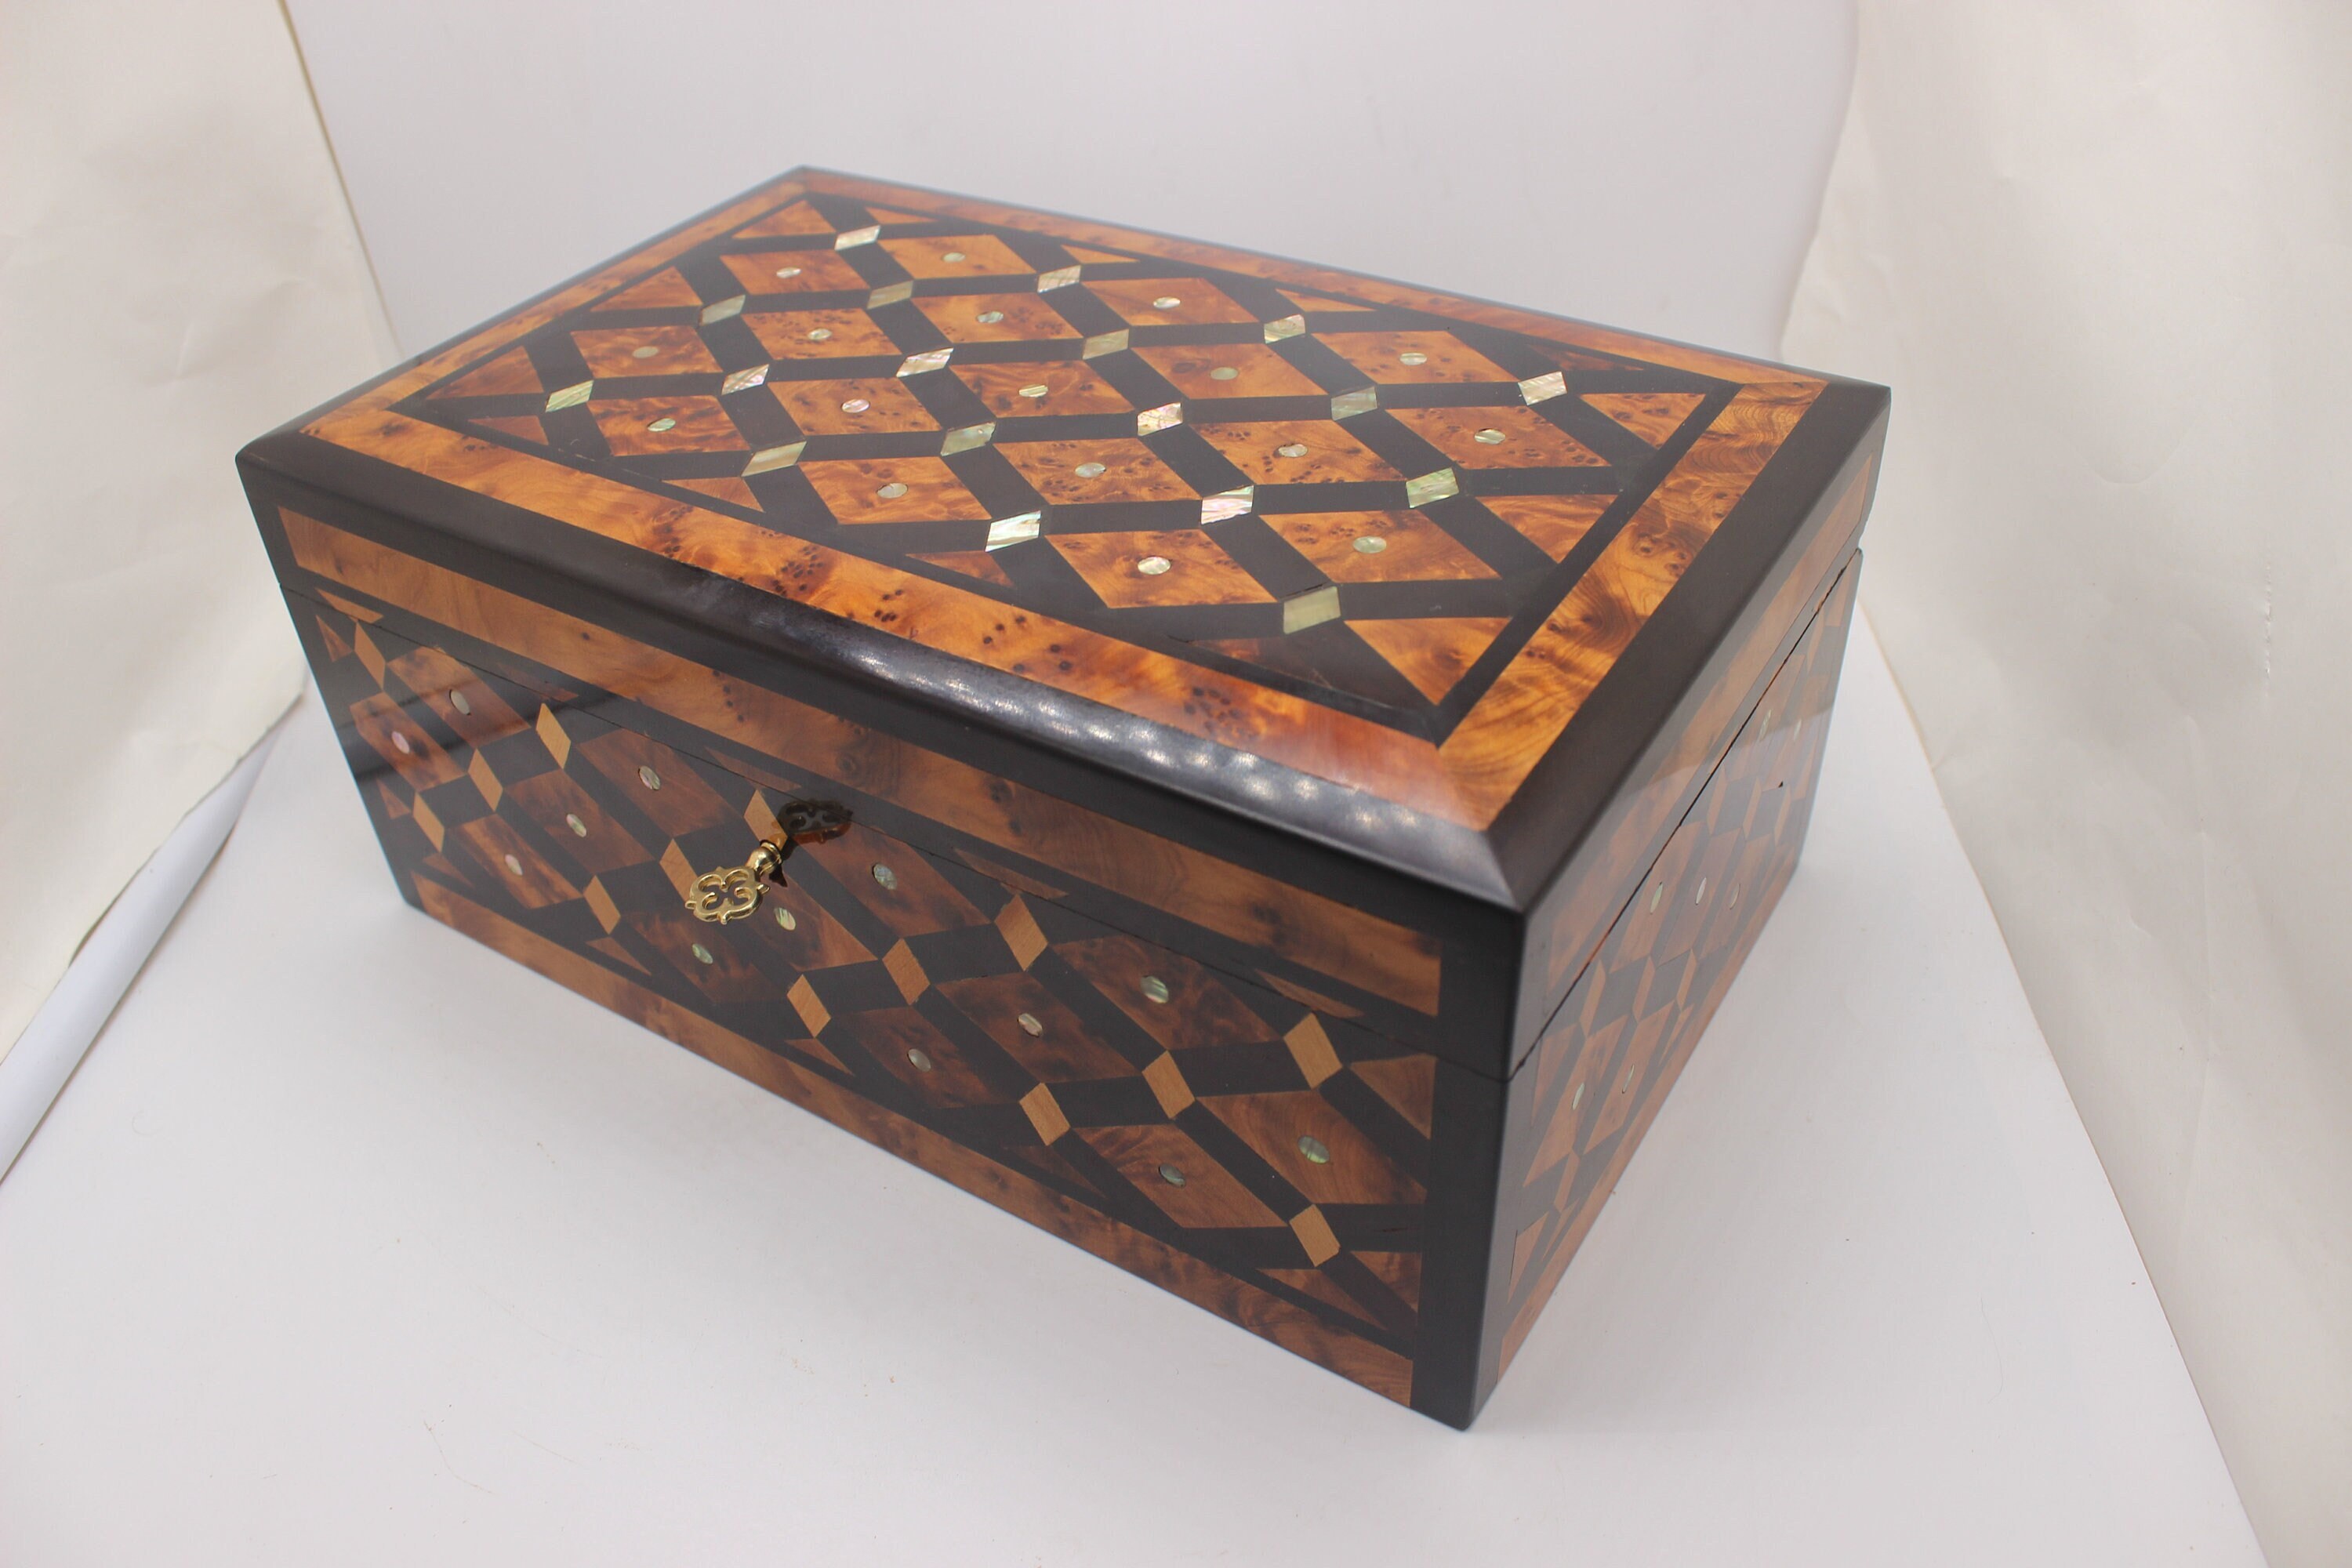 Big Wooden Jewelry Box Made Of Thuya Wood Inlaid With Mother-Of-Pearl,Lock Box 